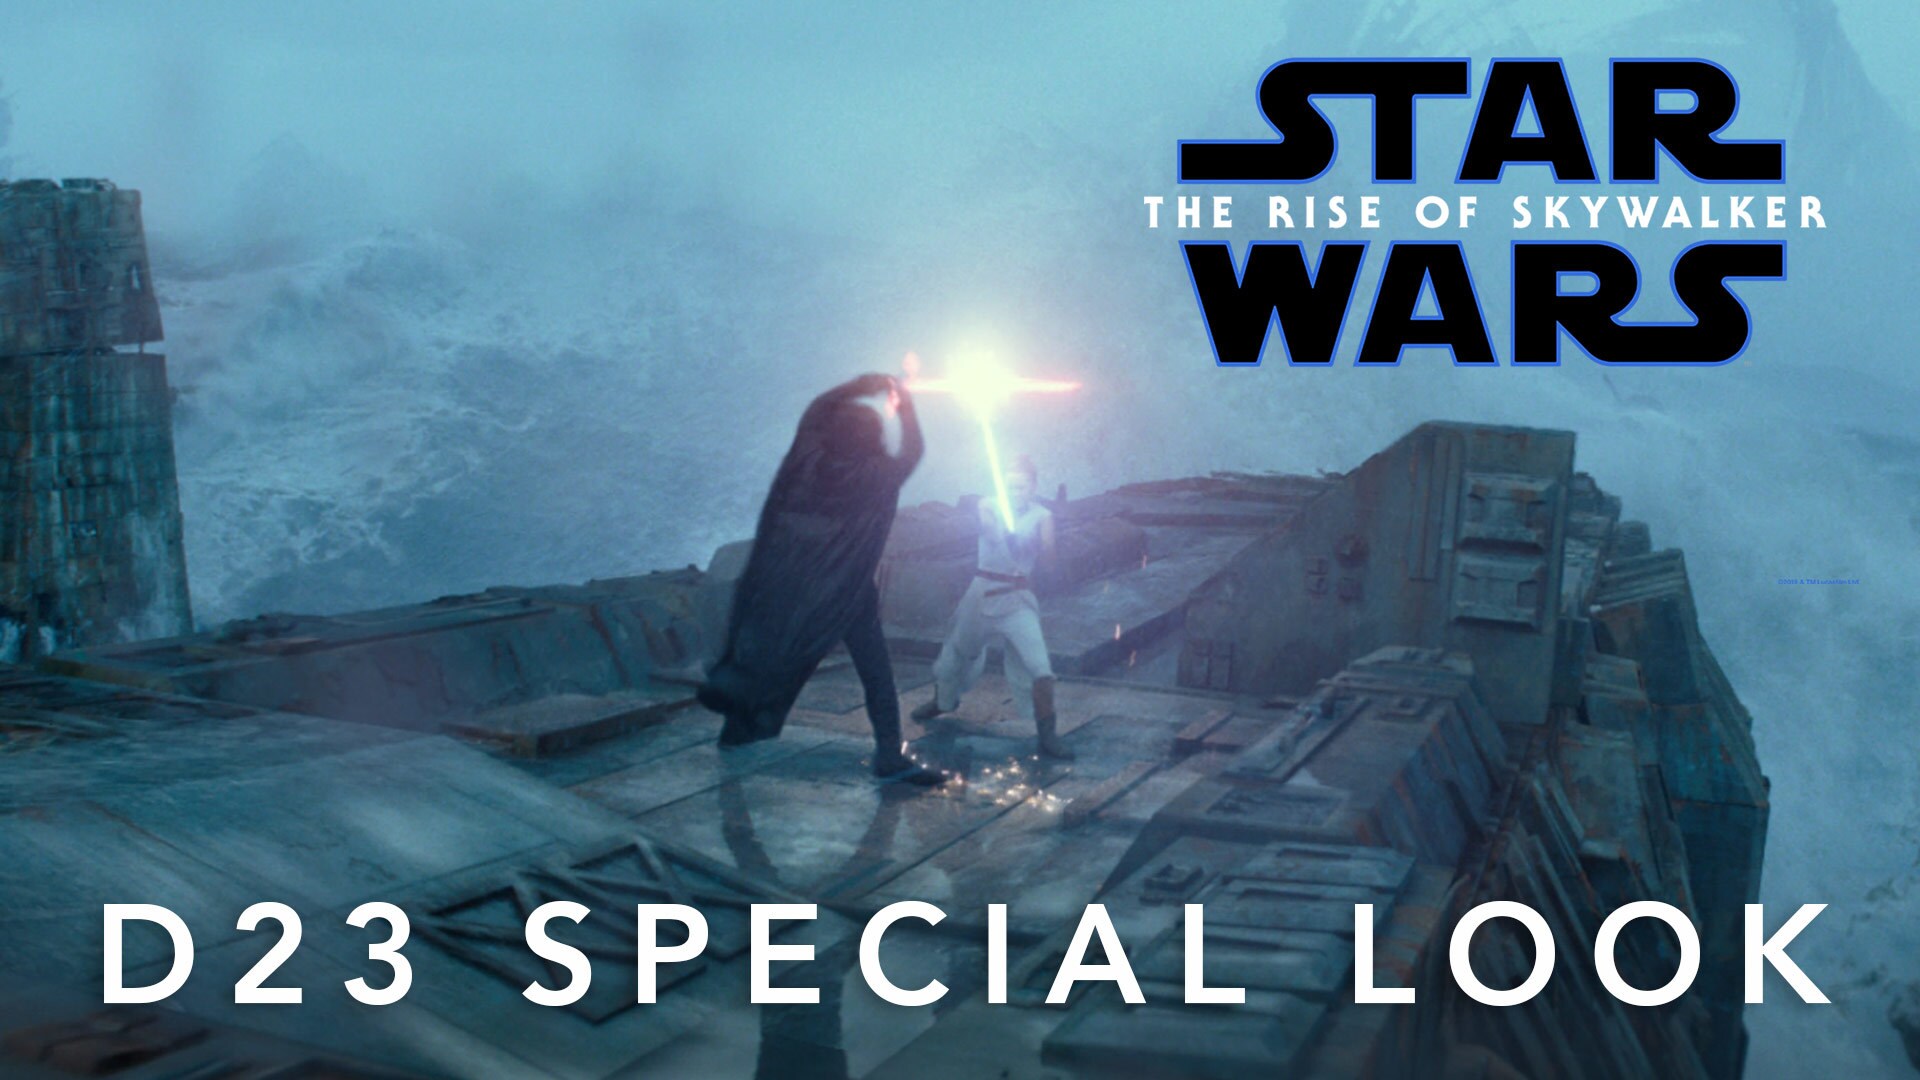 Star Wars: The Rise of Skywalker - D23 Special Look